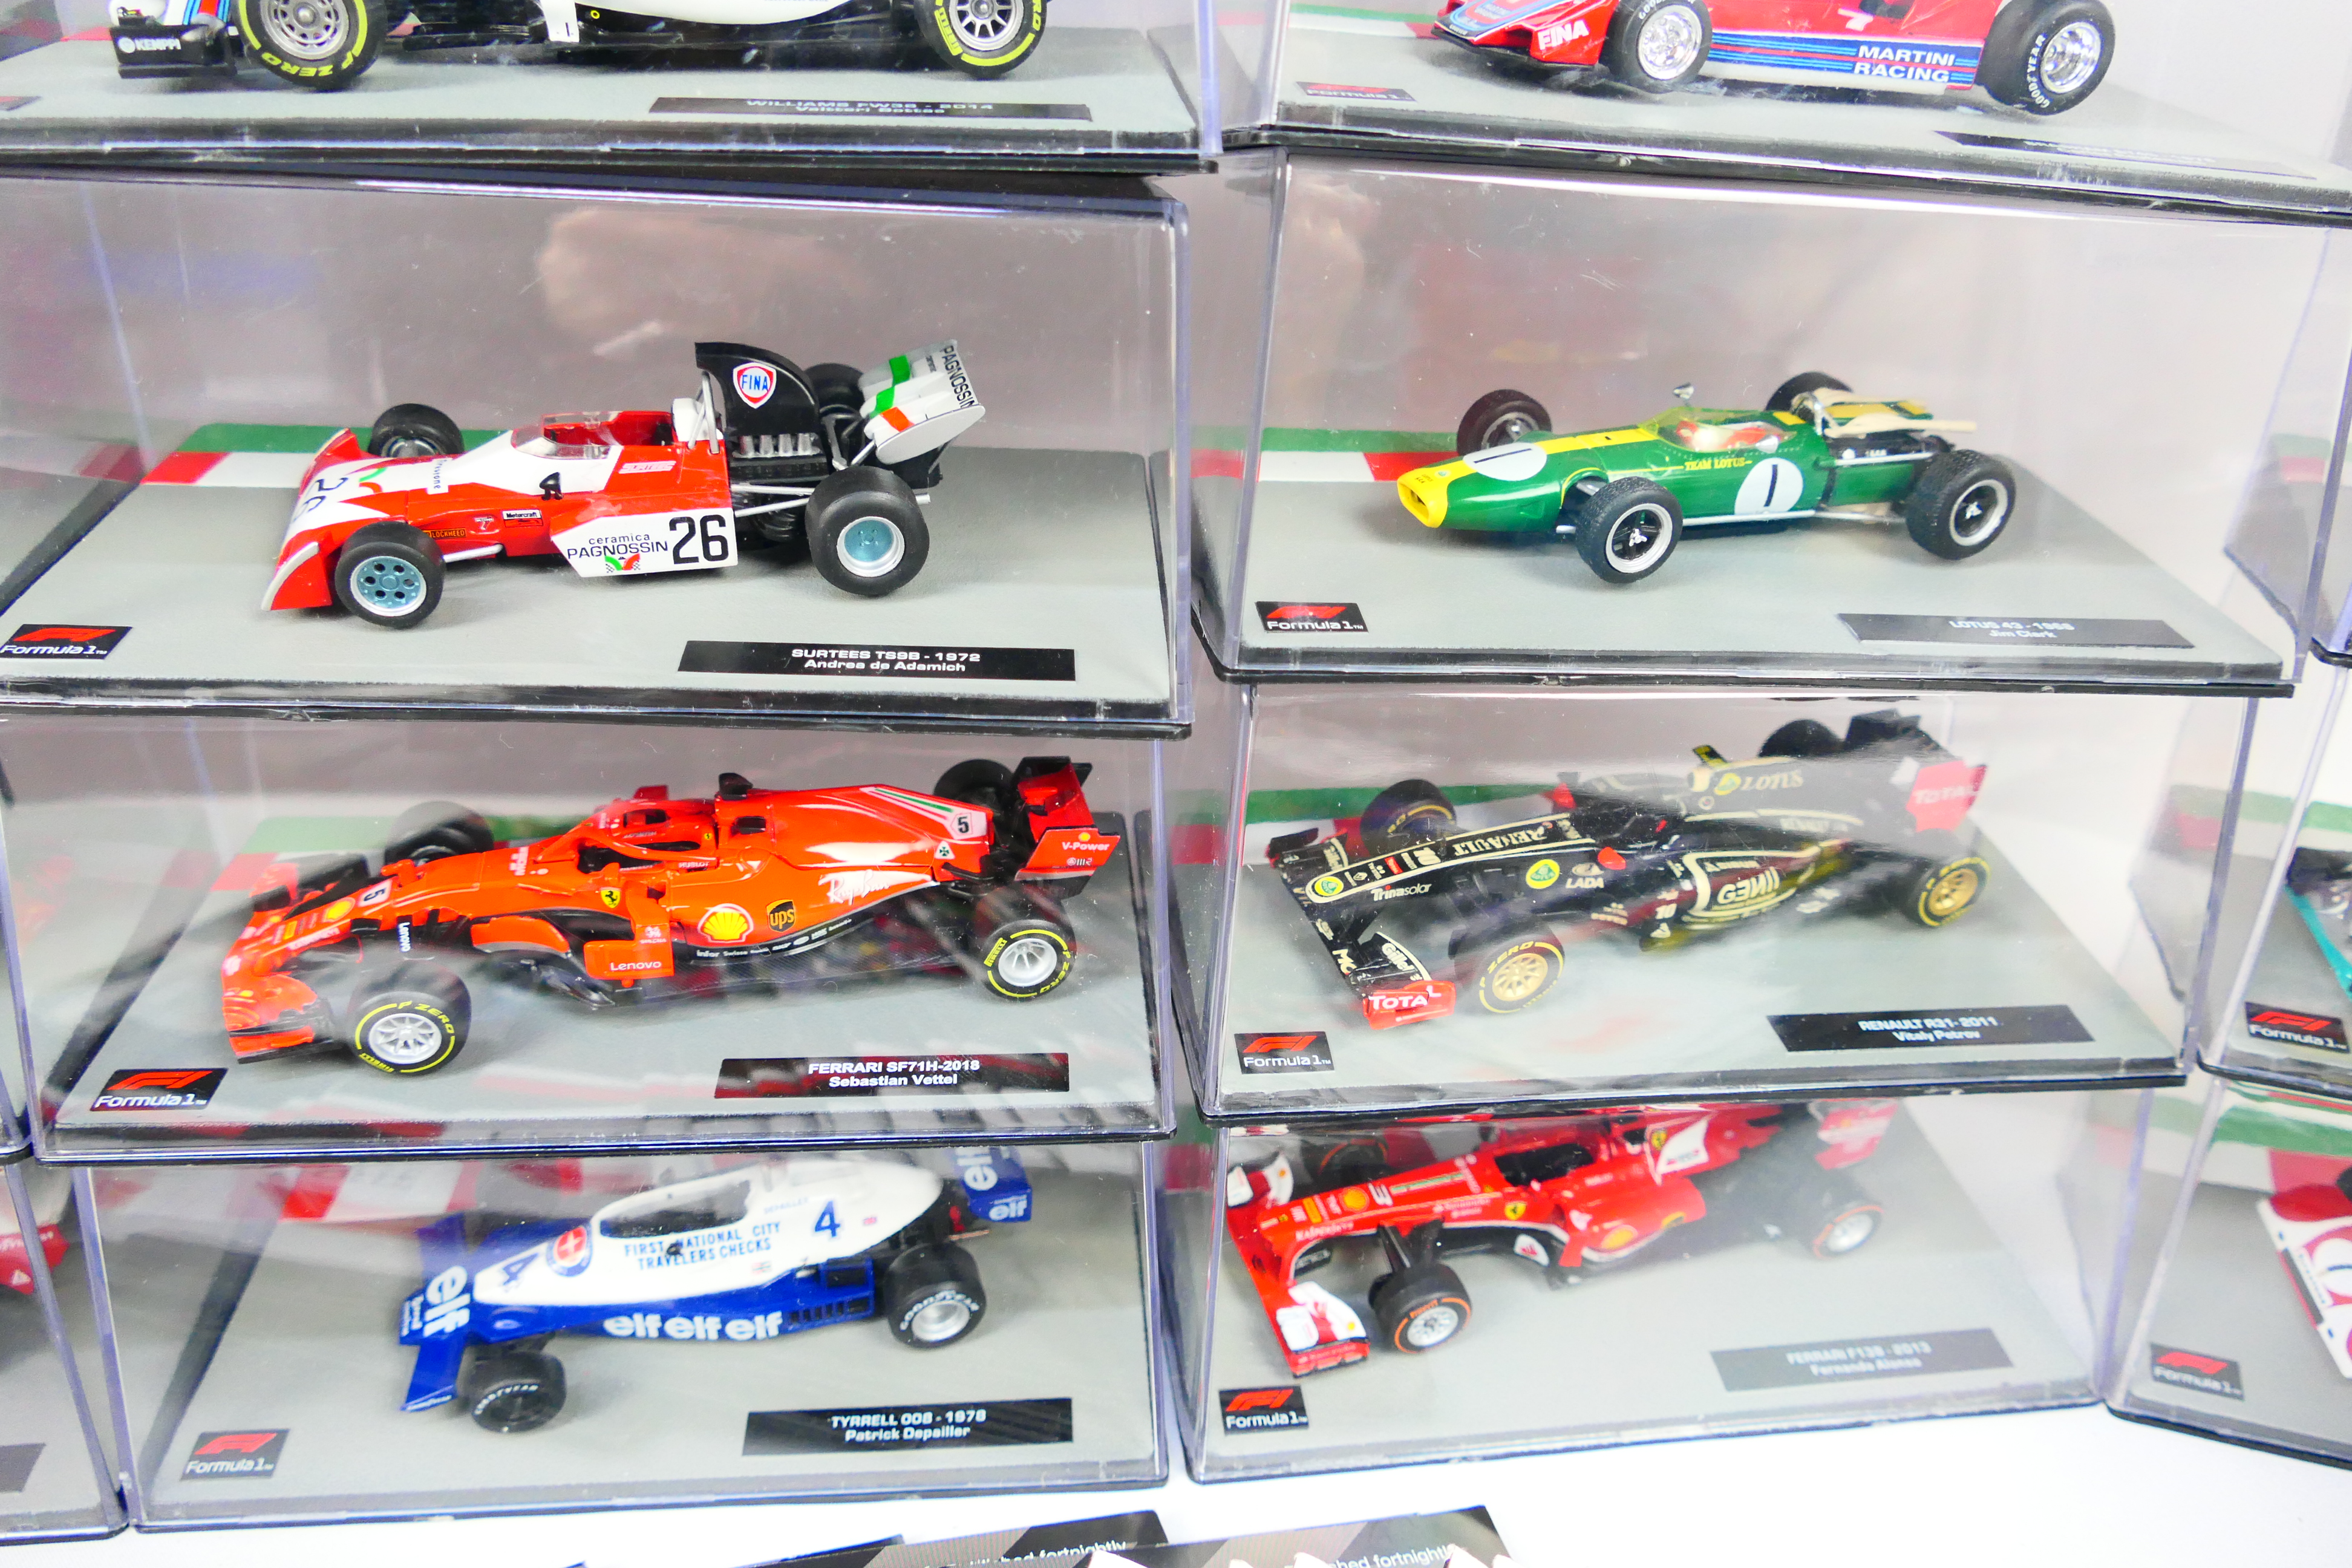 Centauria - Panini - Formula 1 - 35 x models from Formula 1 The Car Collection with the cars and - Image 10 of 14